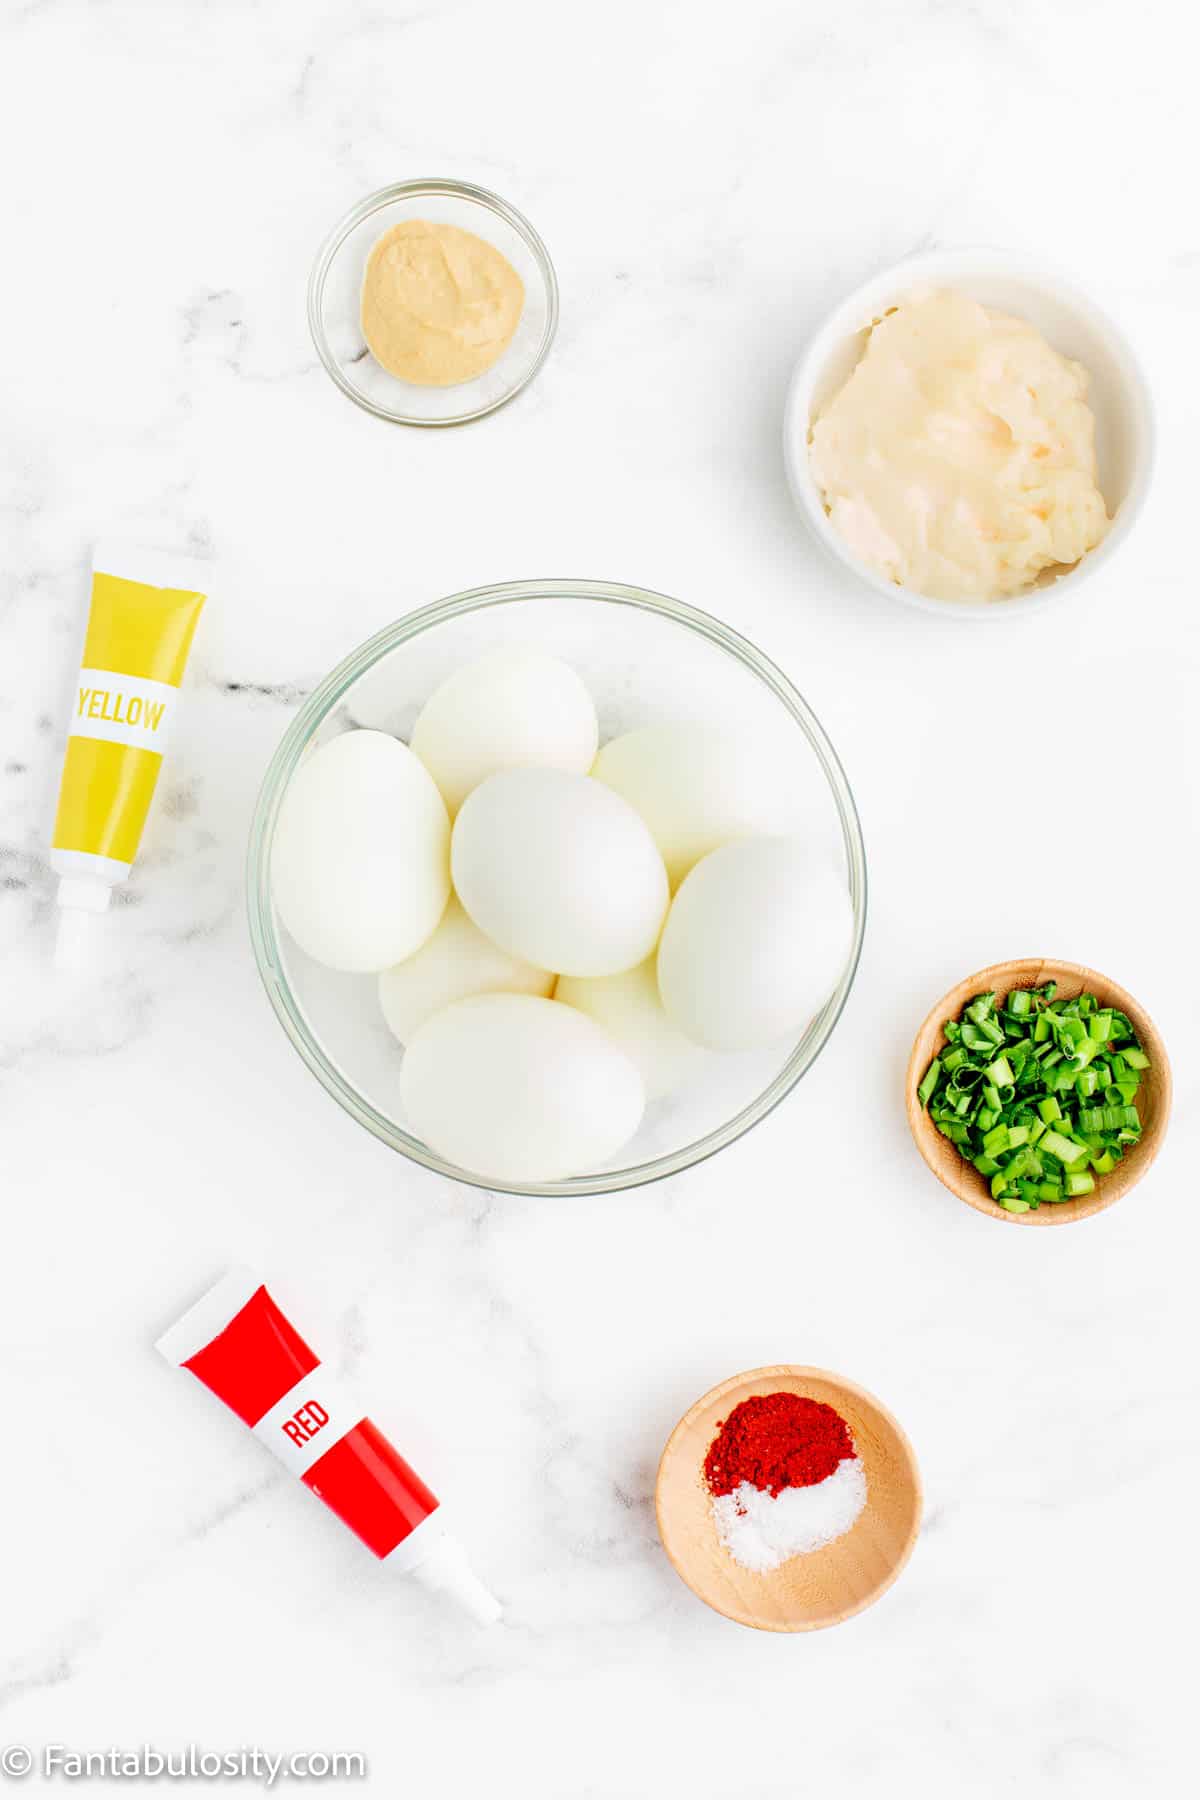 The ingredients to make Pumpkin Deviled Eggs are displayed on a white marble background